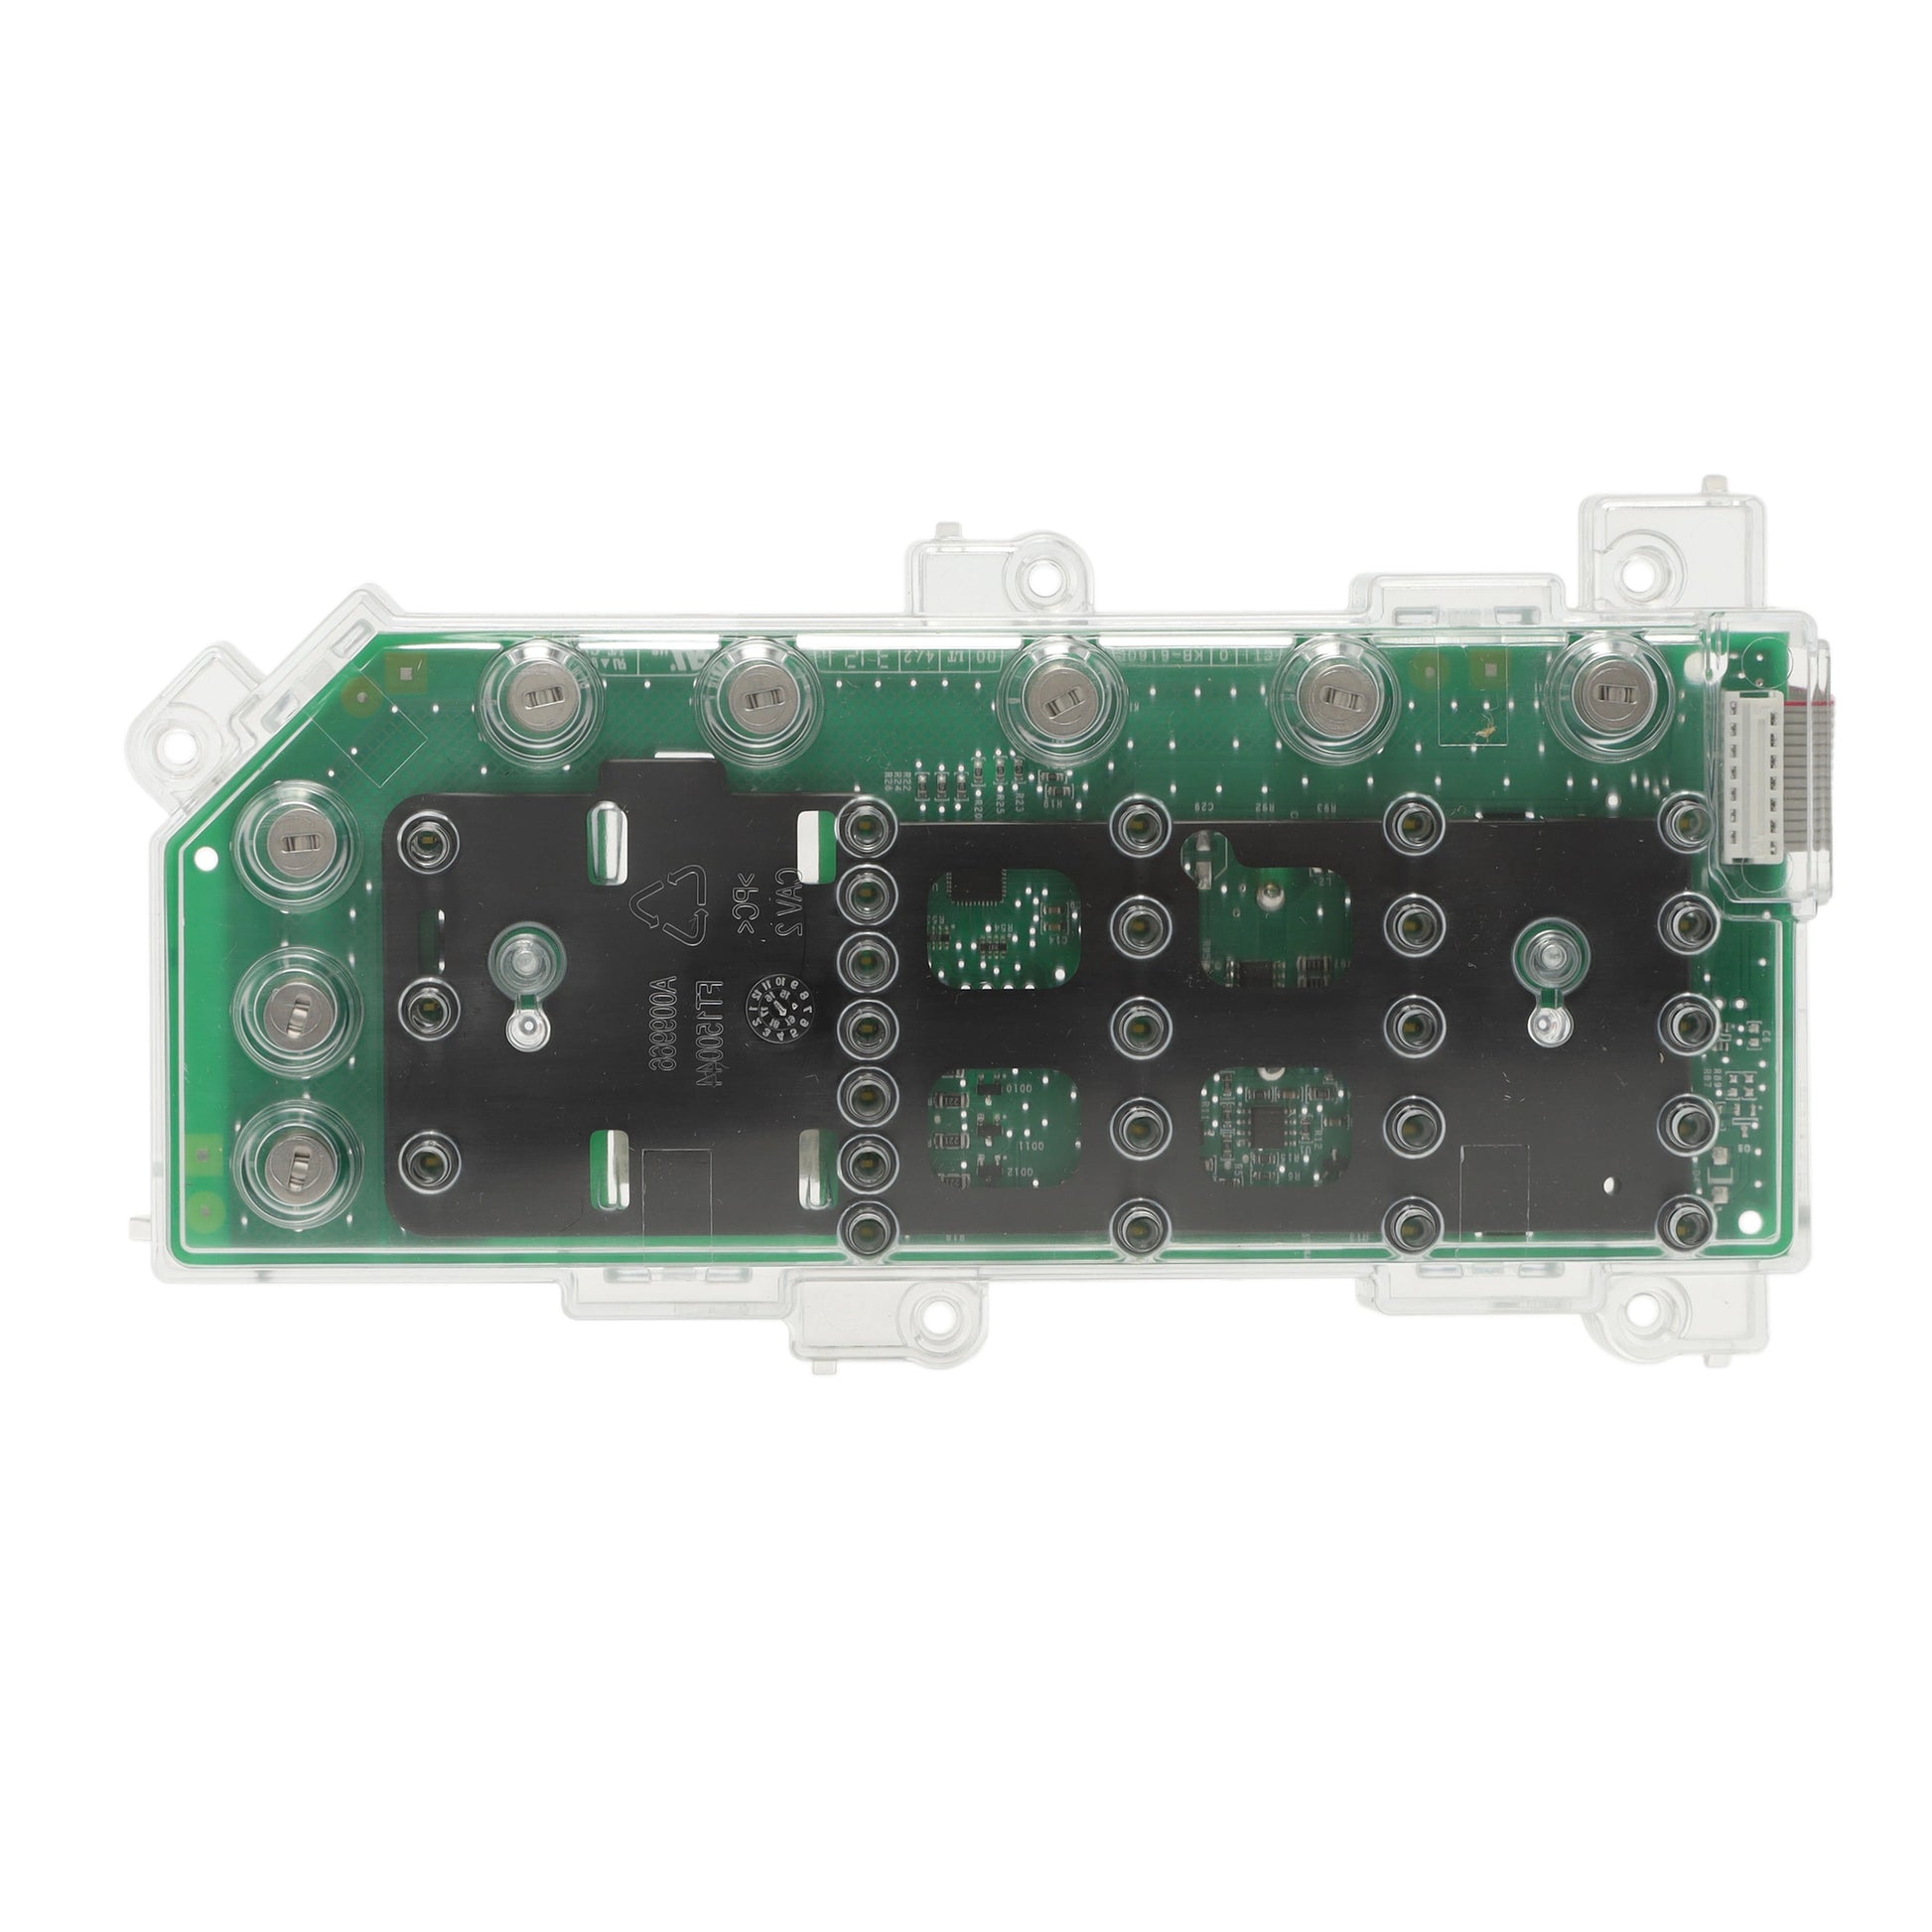 Frigidaire Washer Control Board Assembly OEM - 5304529484, Replaces: AP7019596 PS16620622 EAP16620622 PD00071754